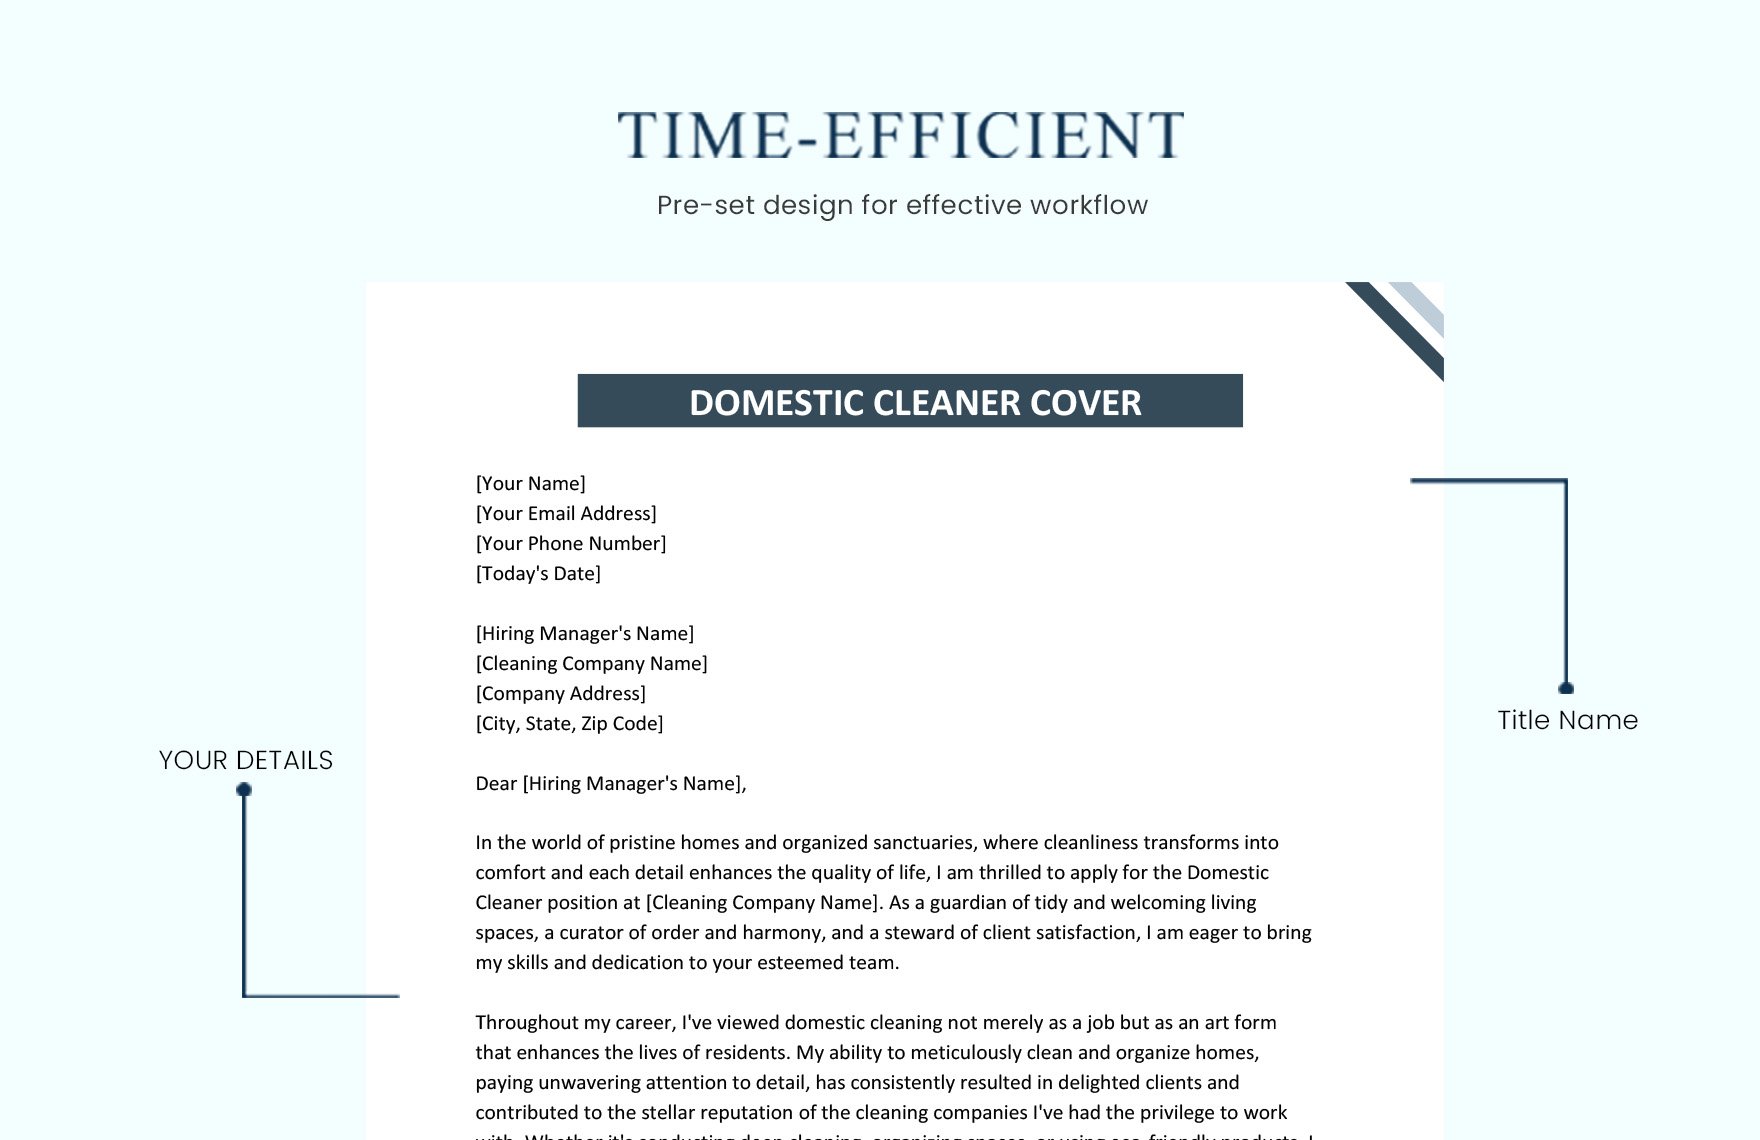 Domestic Cleaner Cover letter